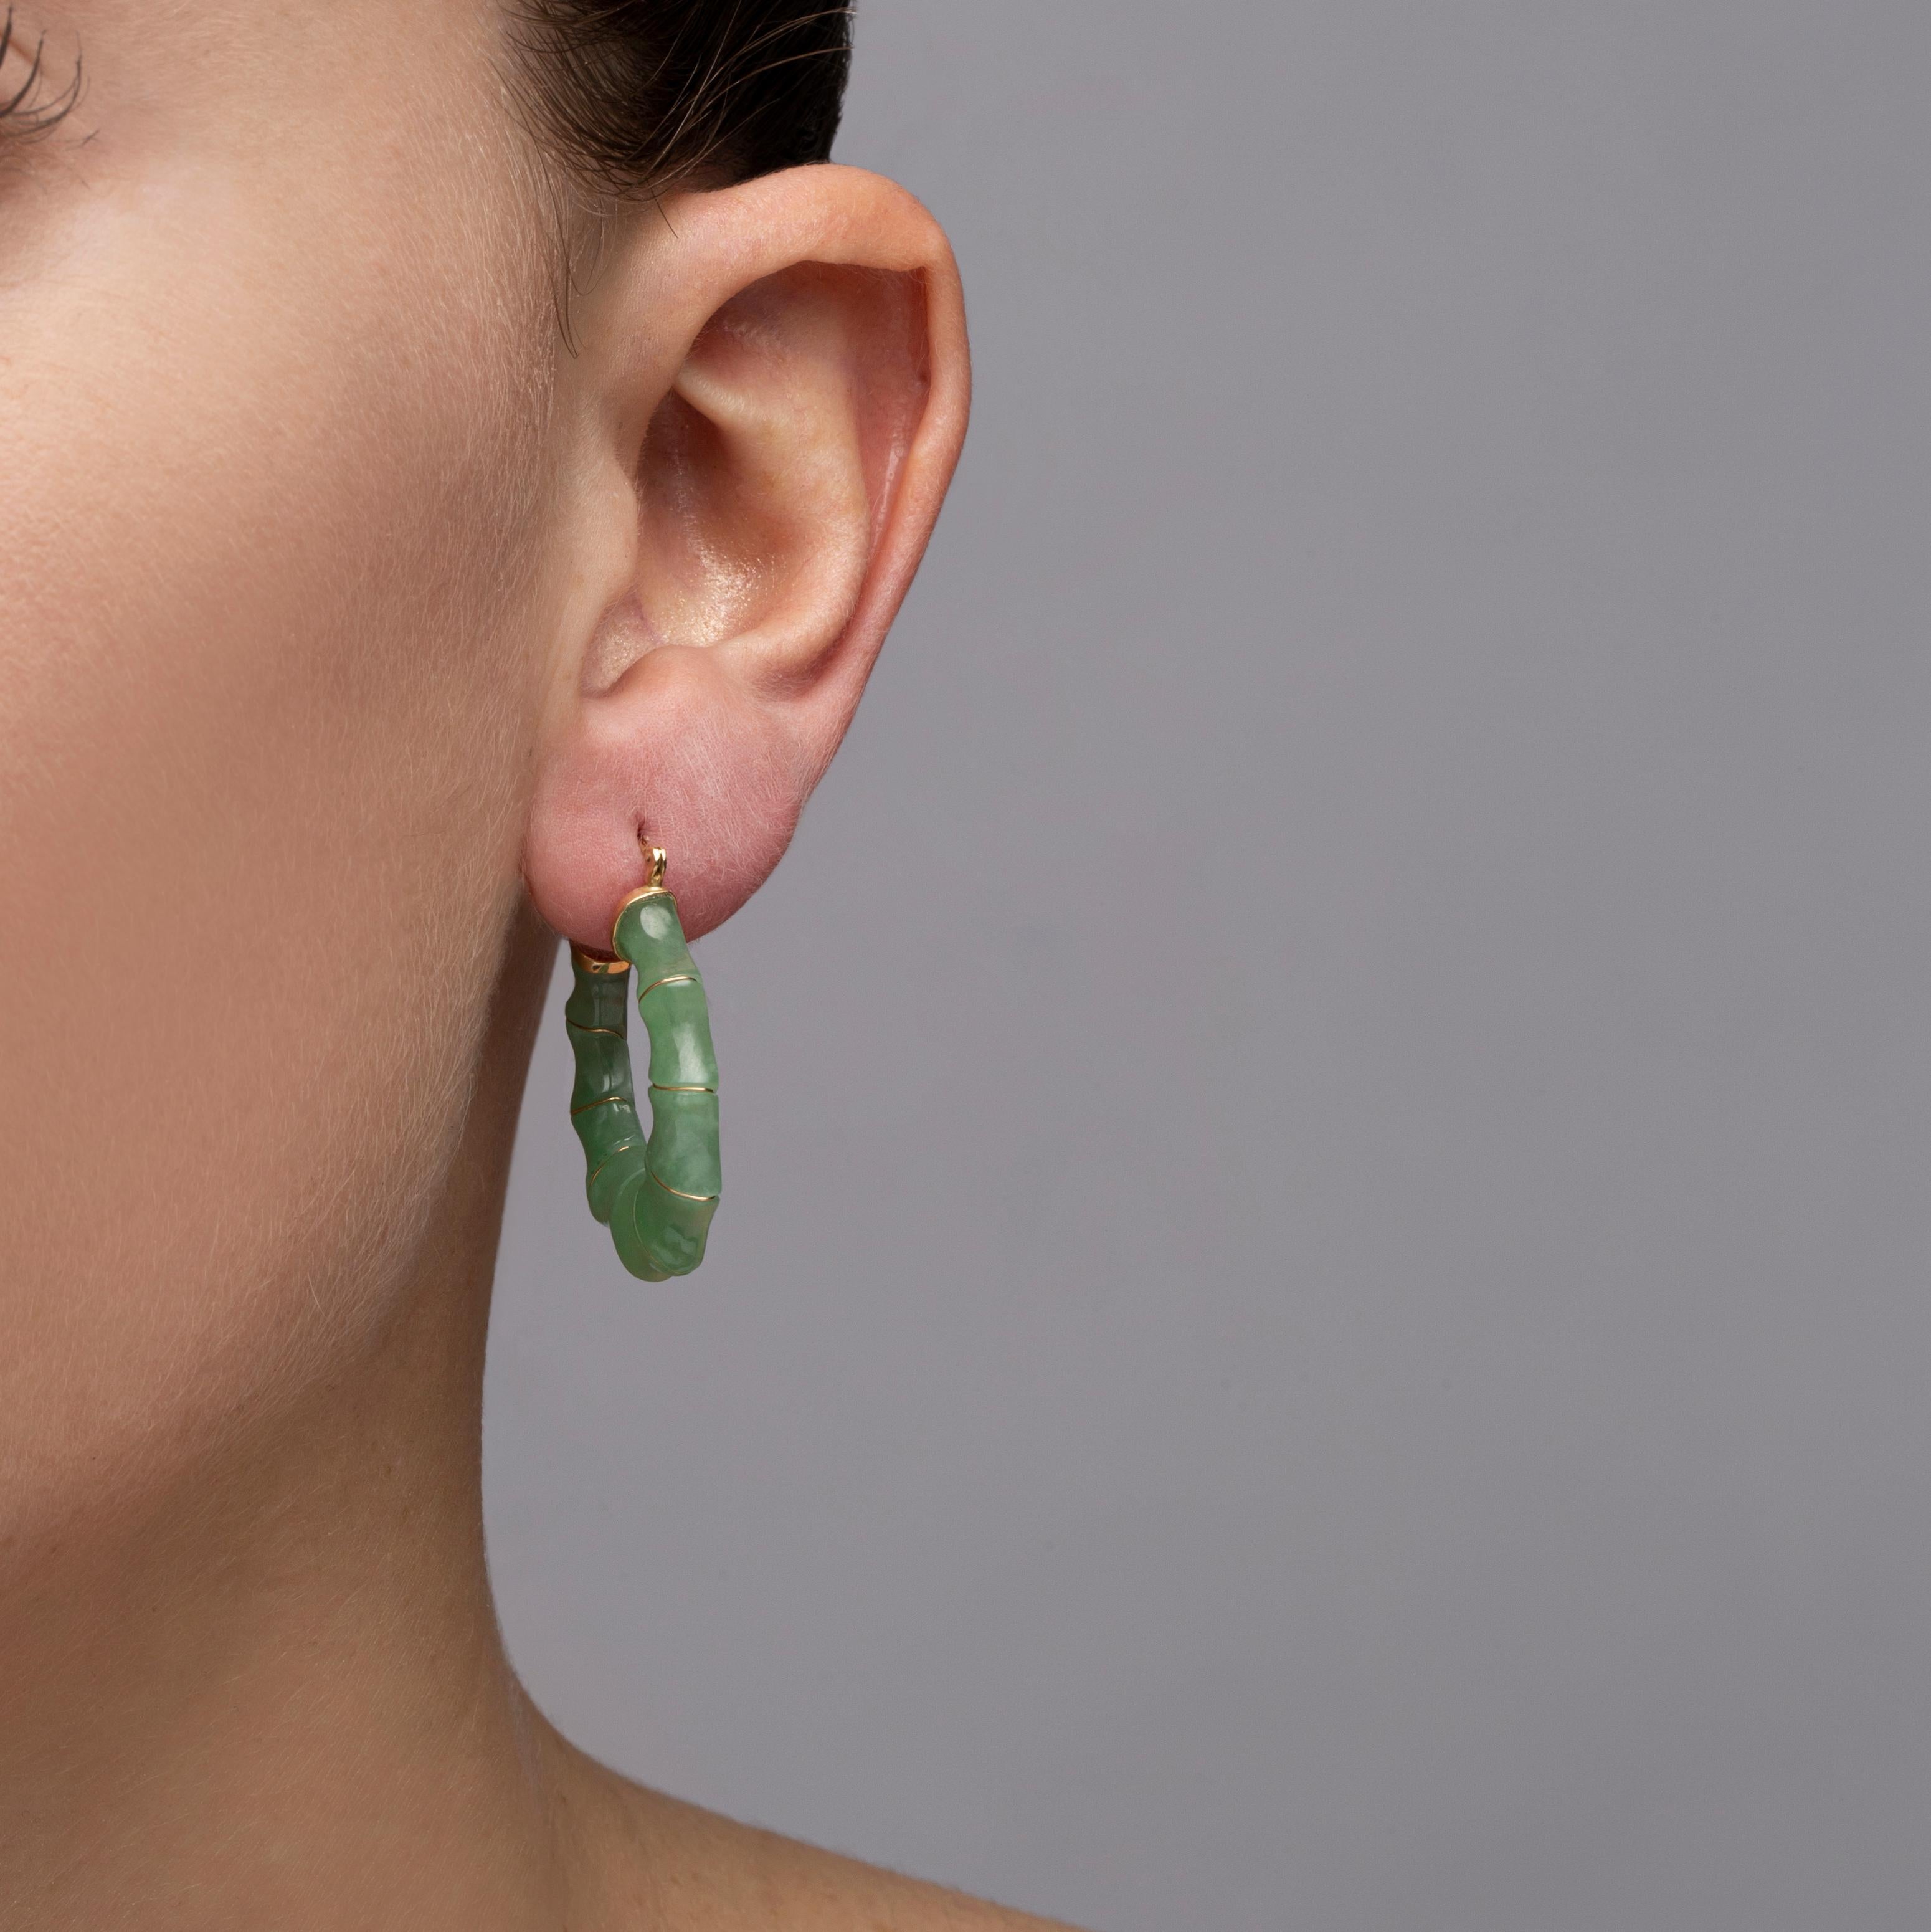 Alex Jona design collection, hand crafted in Italy, 14 karat yellow gold carved Burmese jadeite jade bamboo hoop earrings.  
Dimensions : H 1.28, D 1.12, W 0.20 in. -  H 32.65, D 28.22, W 4.85
Alex Jona jewels stand out, not only for their special